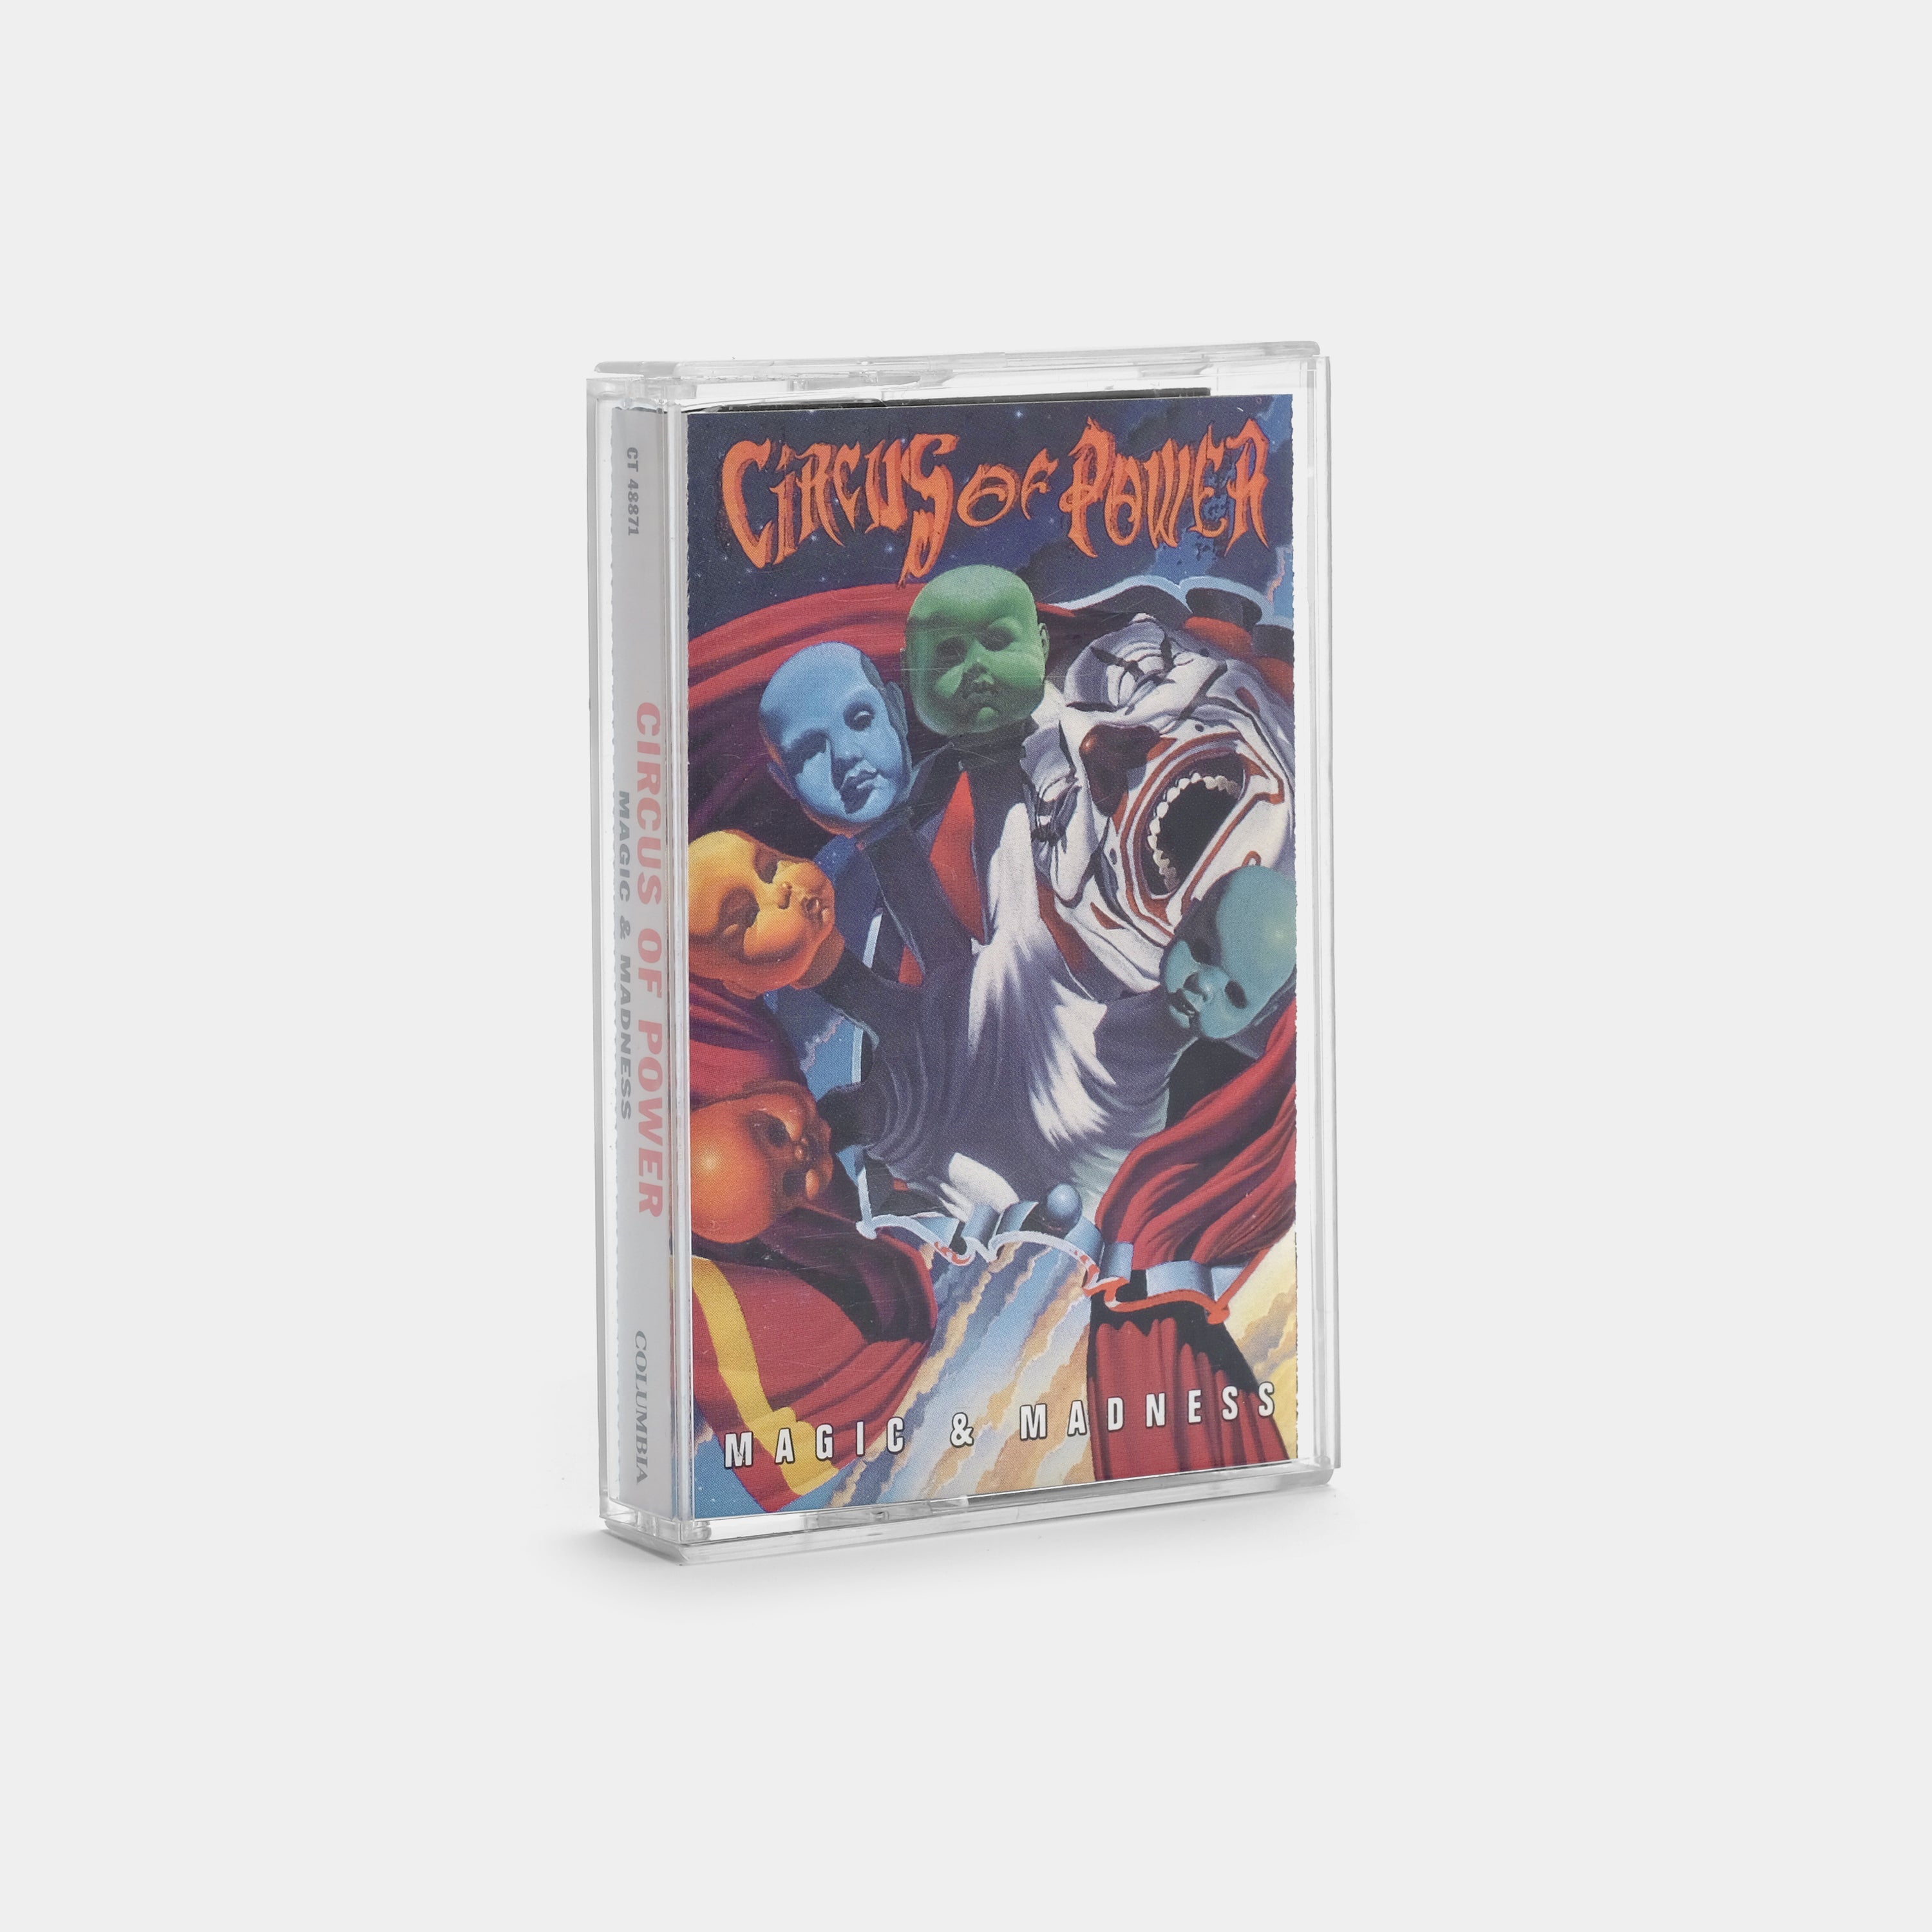 Circus Of Power - Magic & Madness Cassette Tape